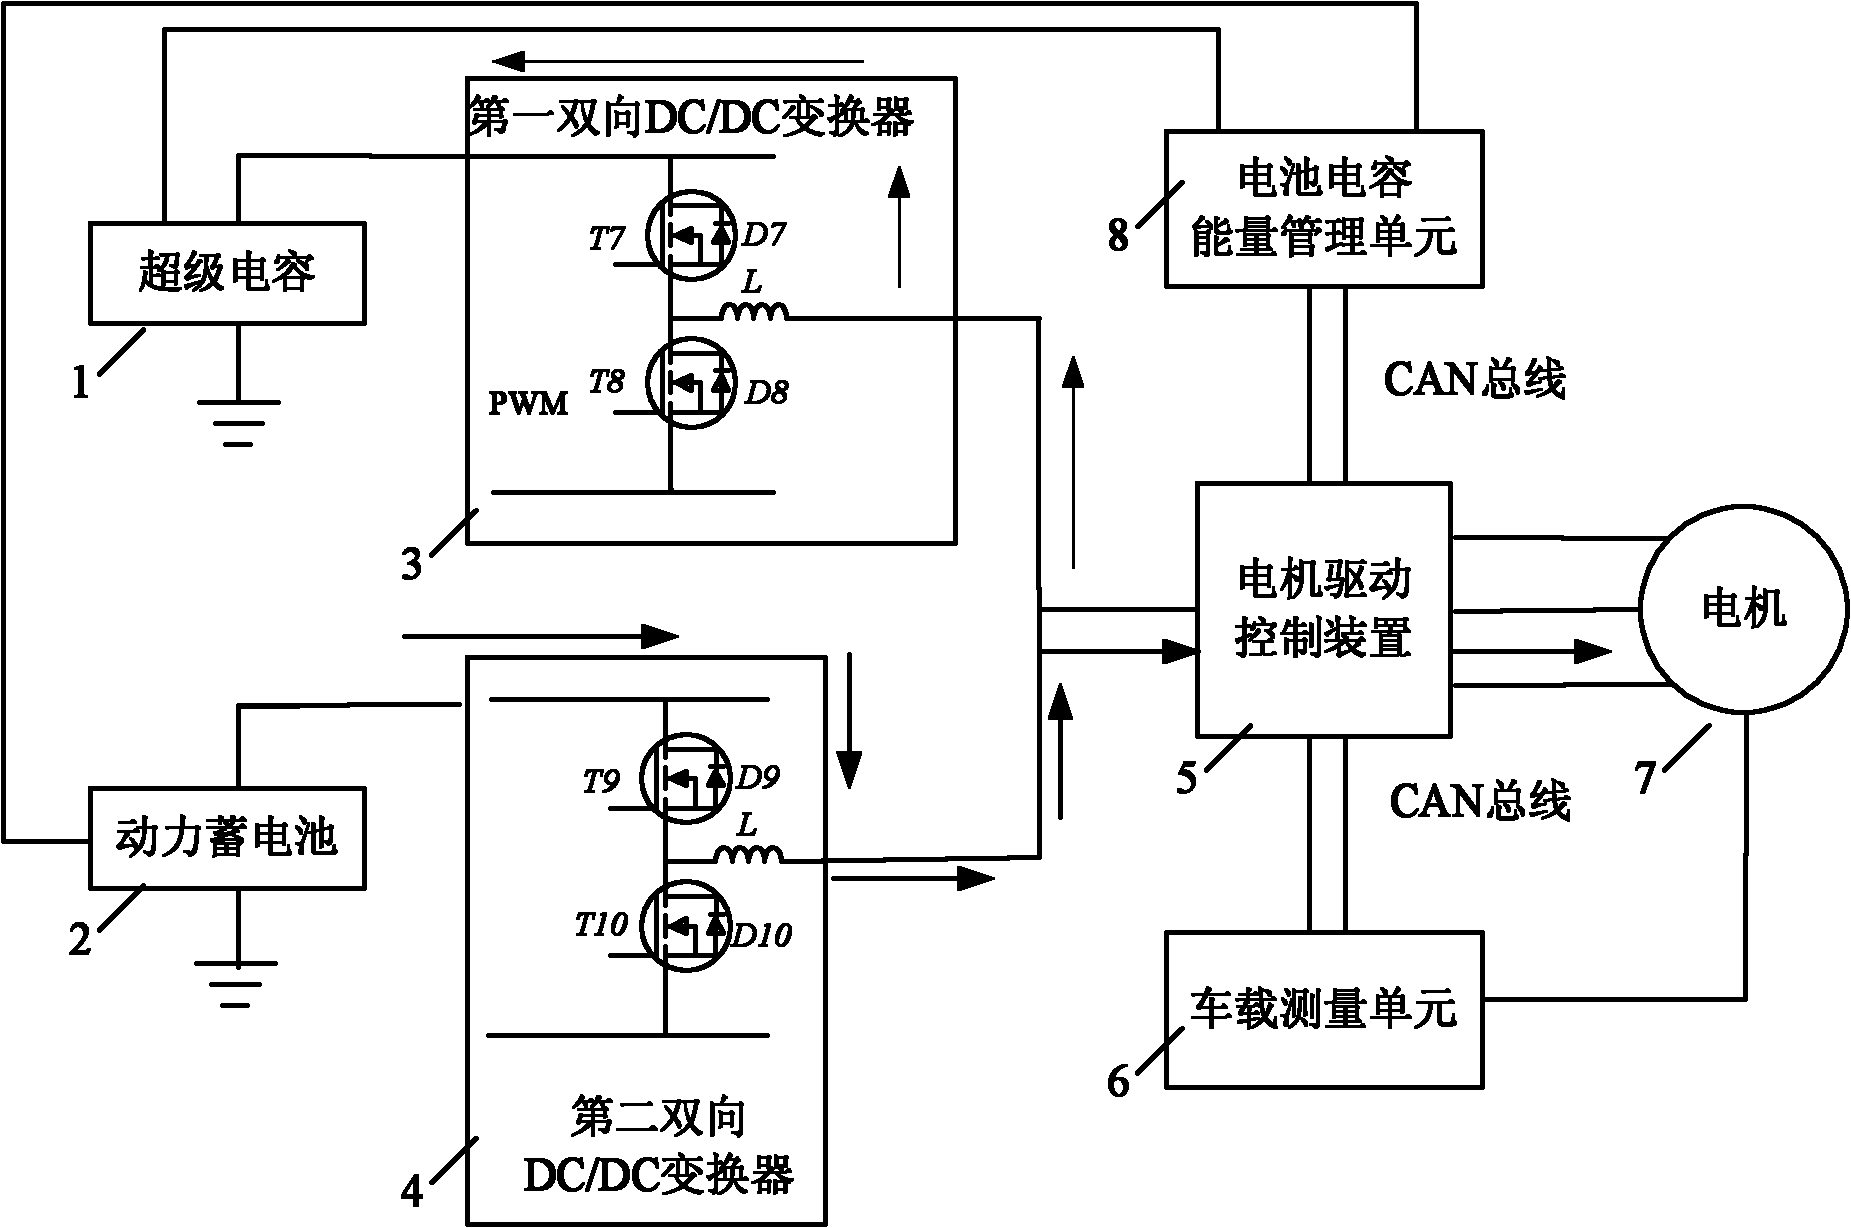 Super capacitor-based electric automobile hybrid power control system